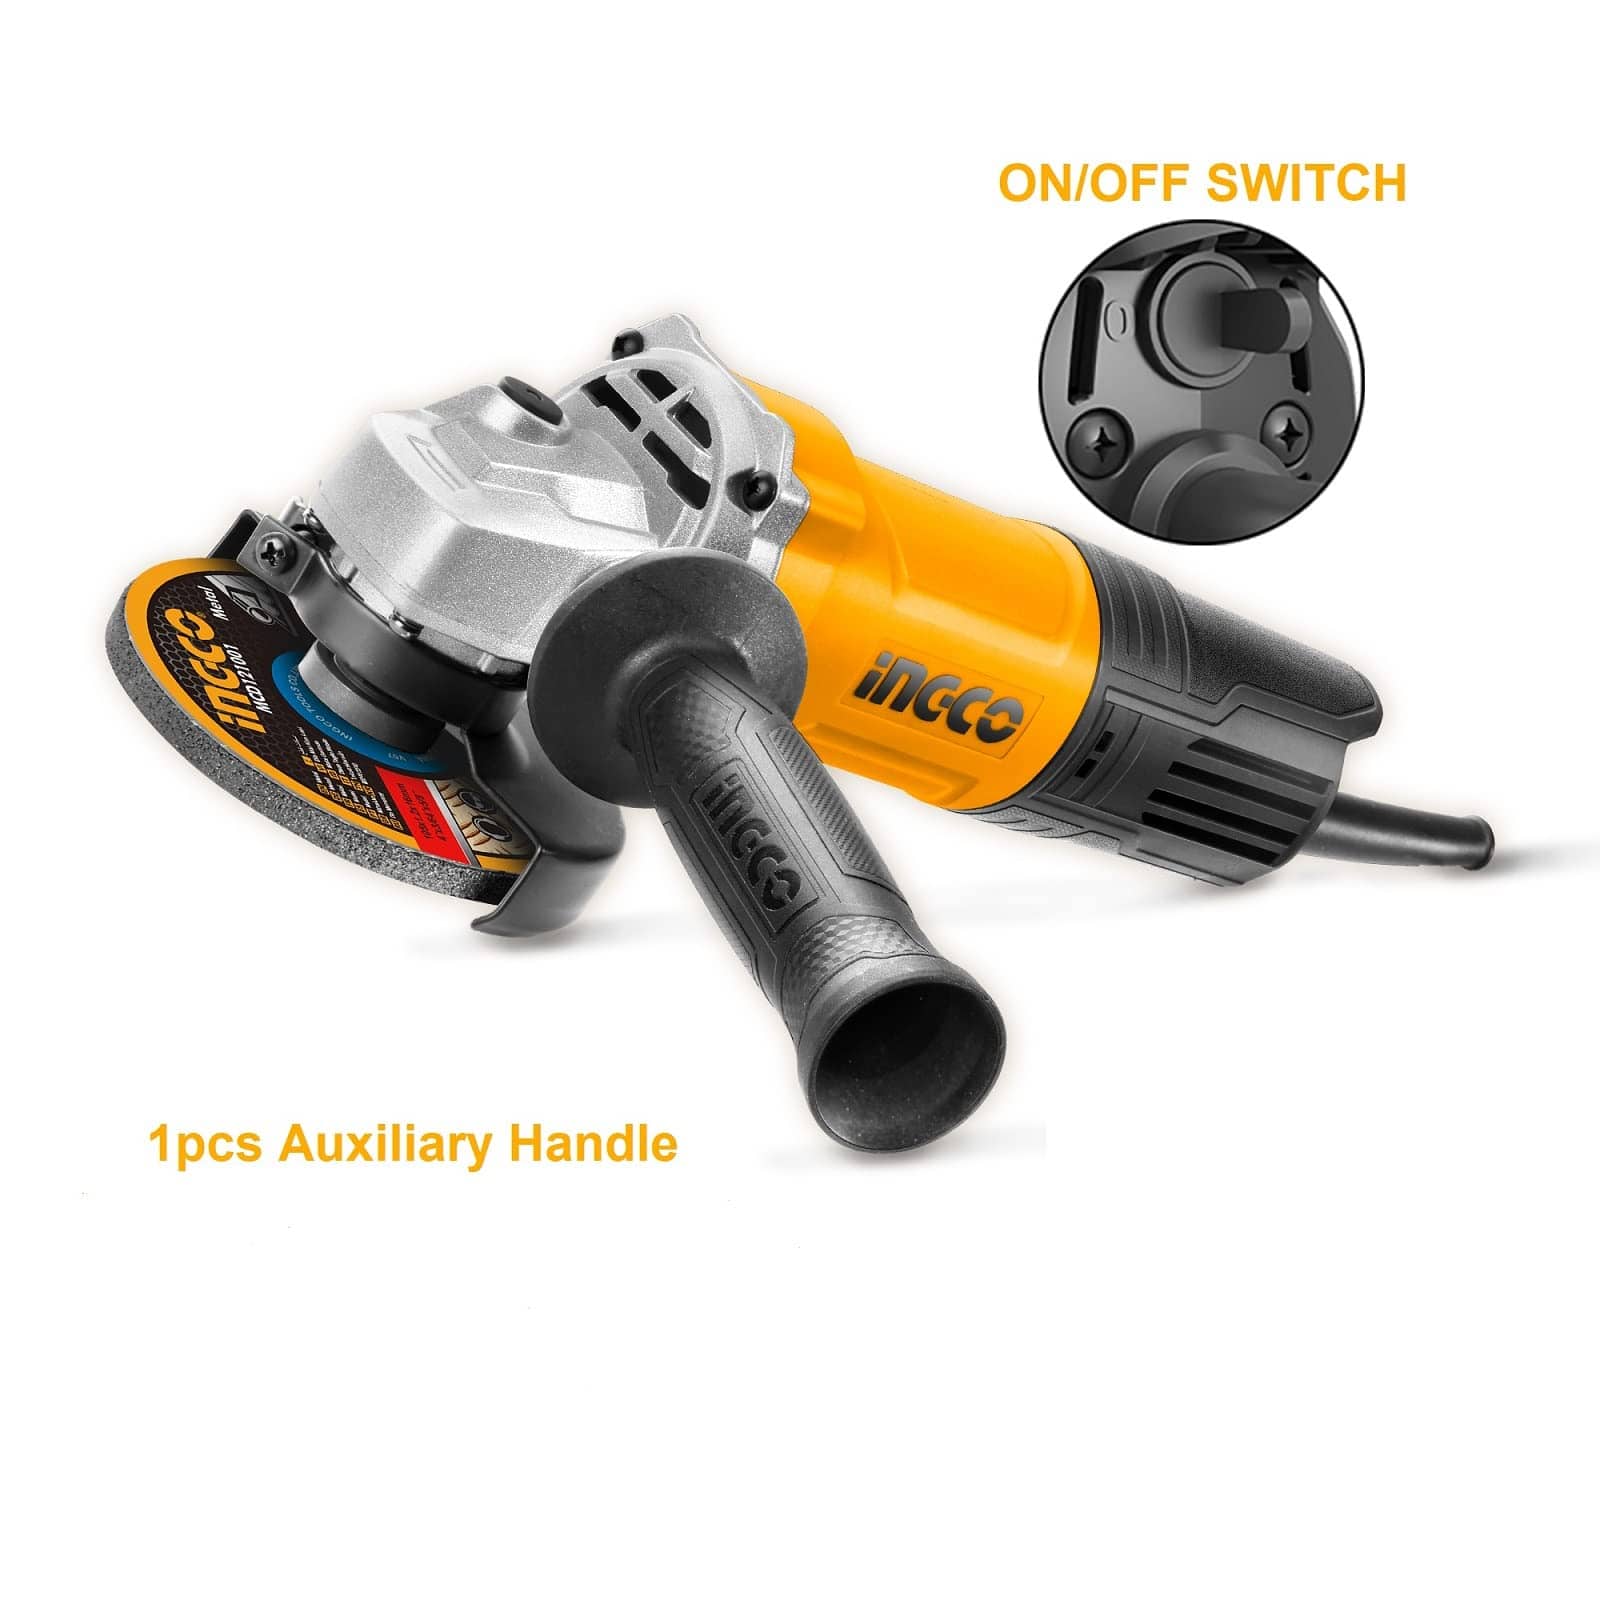 Ingco 4"/100mm Angle Grinder 710W - AG71038 | Supply Master | Accra, Ghana Grinder Buy Tools hardware Building materials